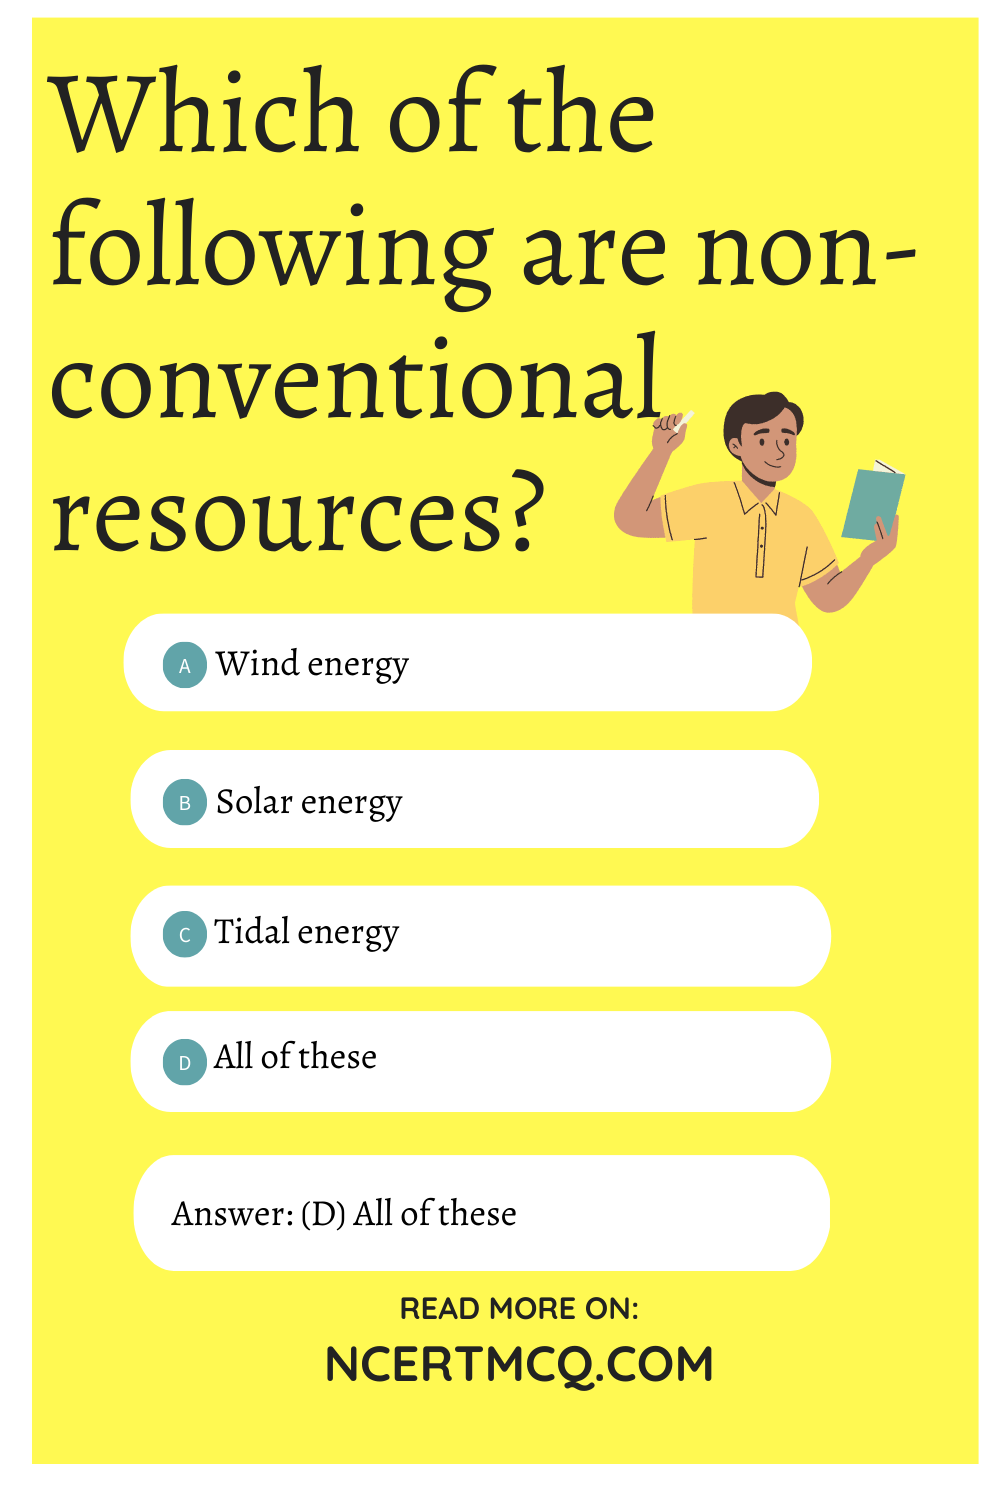 Which of the following are non-conventional resources?